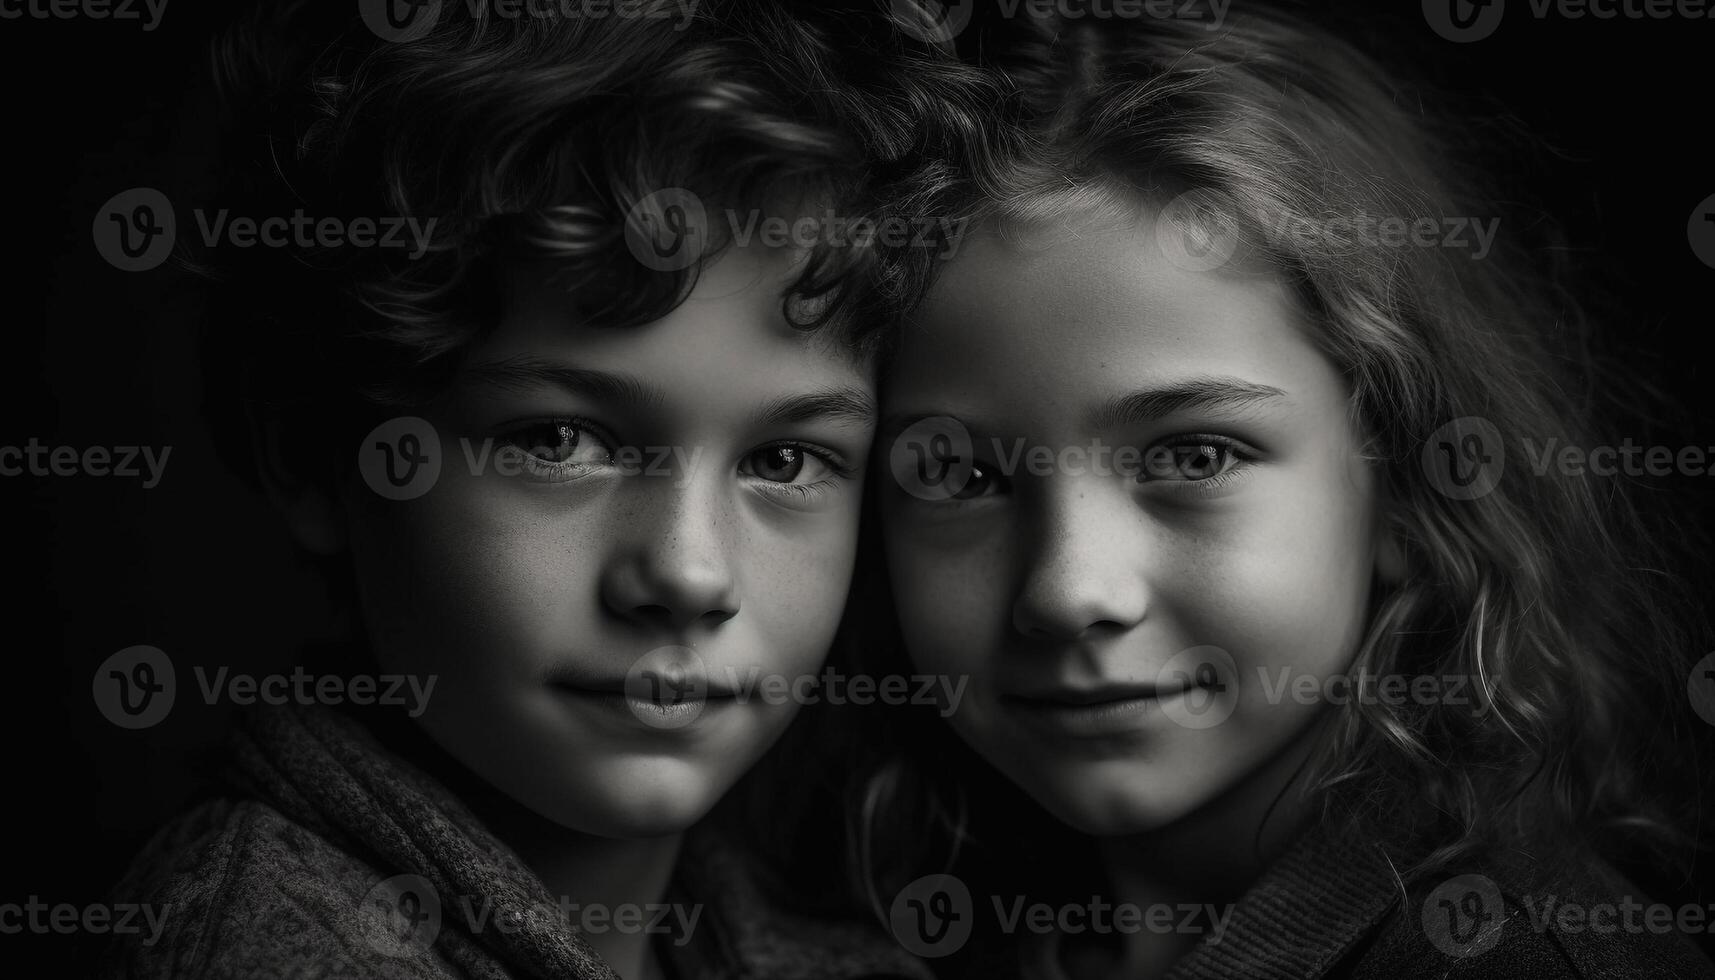 Smiling siblings embrace, exuding love and innocence in monochrome portrait generated by AI photo